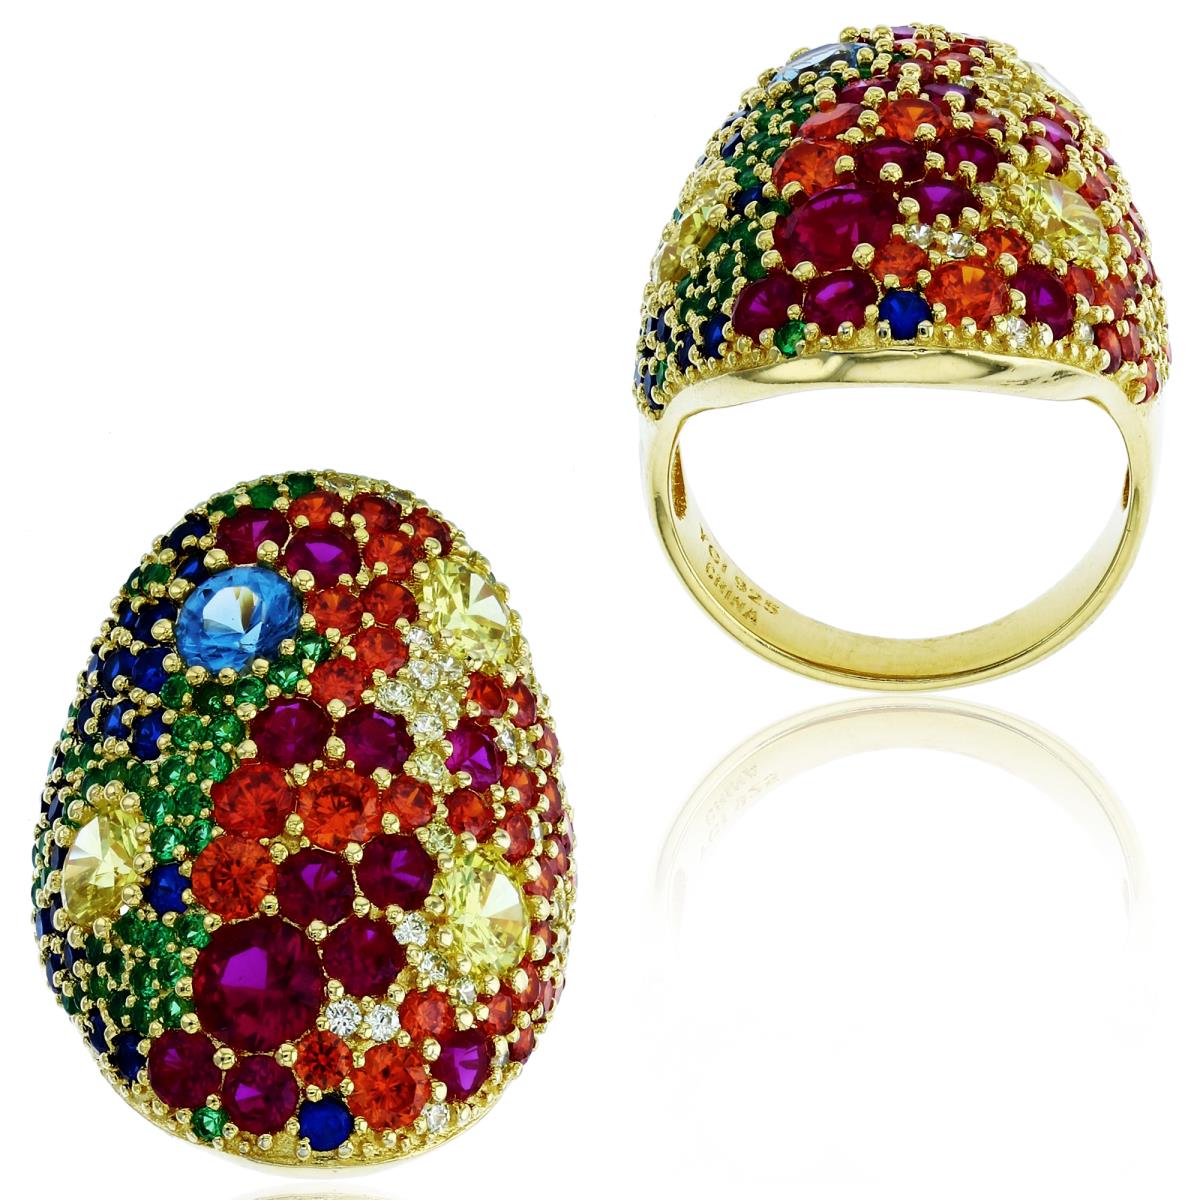 Sterling Silver+1Micron Yellow Gold Rnd Multicolor CZ Oval Dome Ring